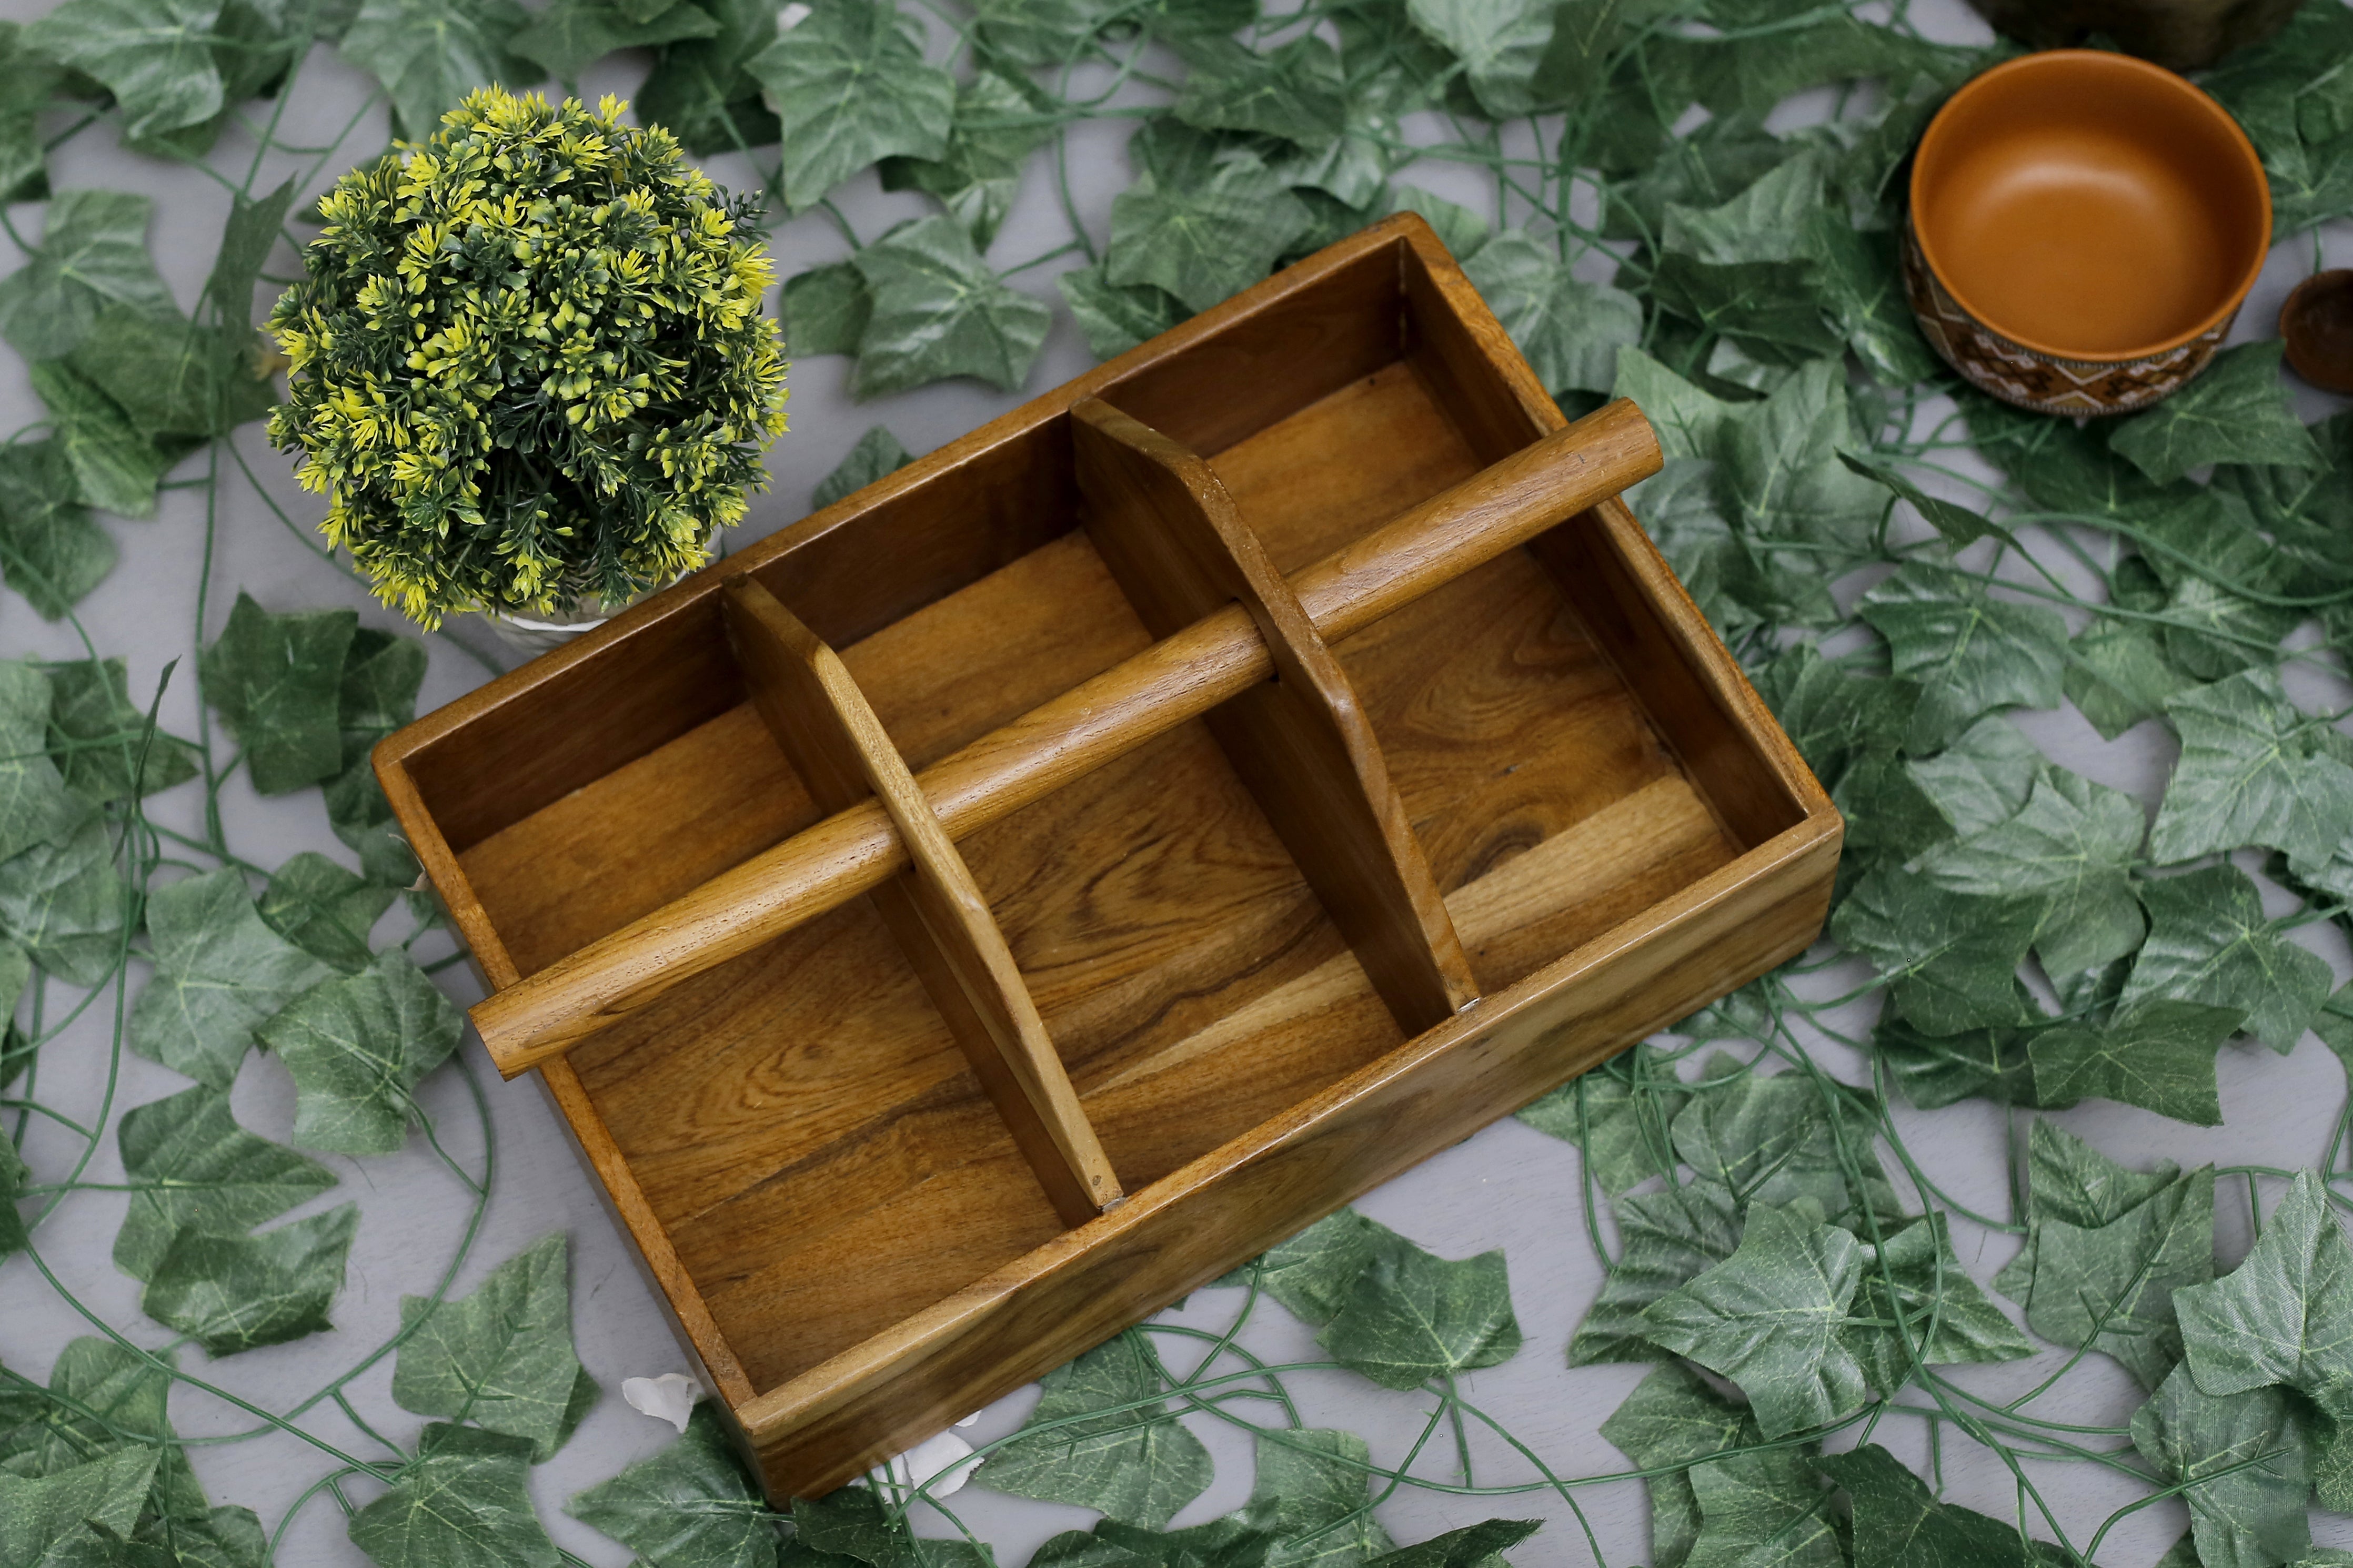 Muti Purpose Handcrafted Wooden Tray Tray